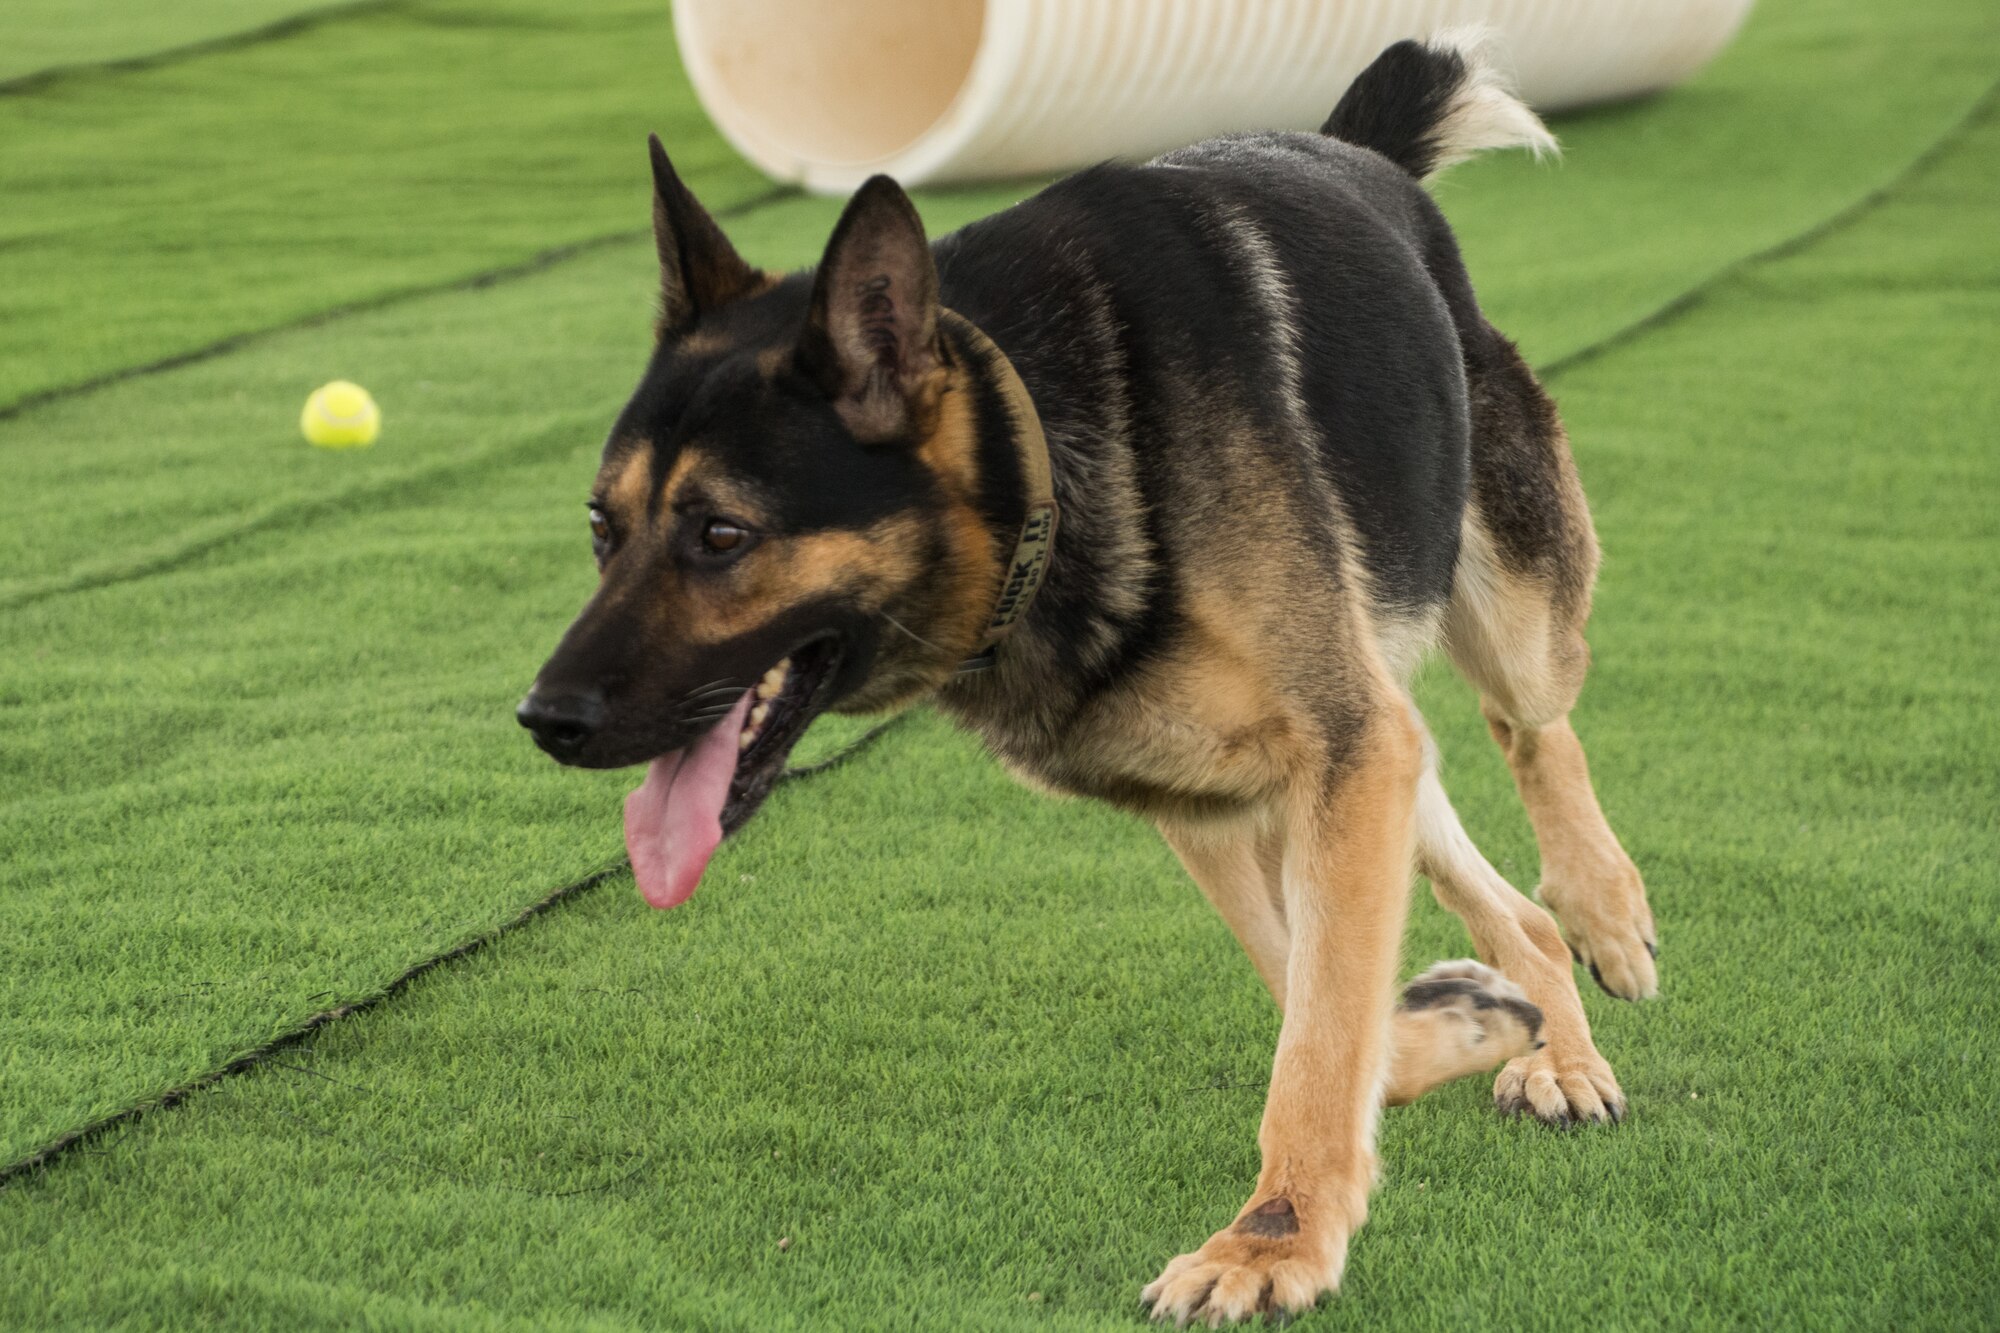 Members of the 379th Expeditionary Security Forces Squadron participate in a K-9 competition during National Police Week at Al Udeid Air Base, Qatar, May 14, 2018. Throughout the week, security forces members held numerous events in honor of defenders who died in the line of duty. (U.S. Air Force photo by Tech. Sgt. Ted Nichols)